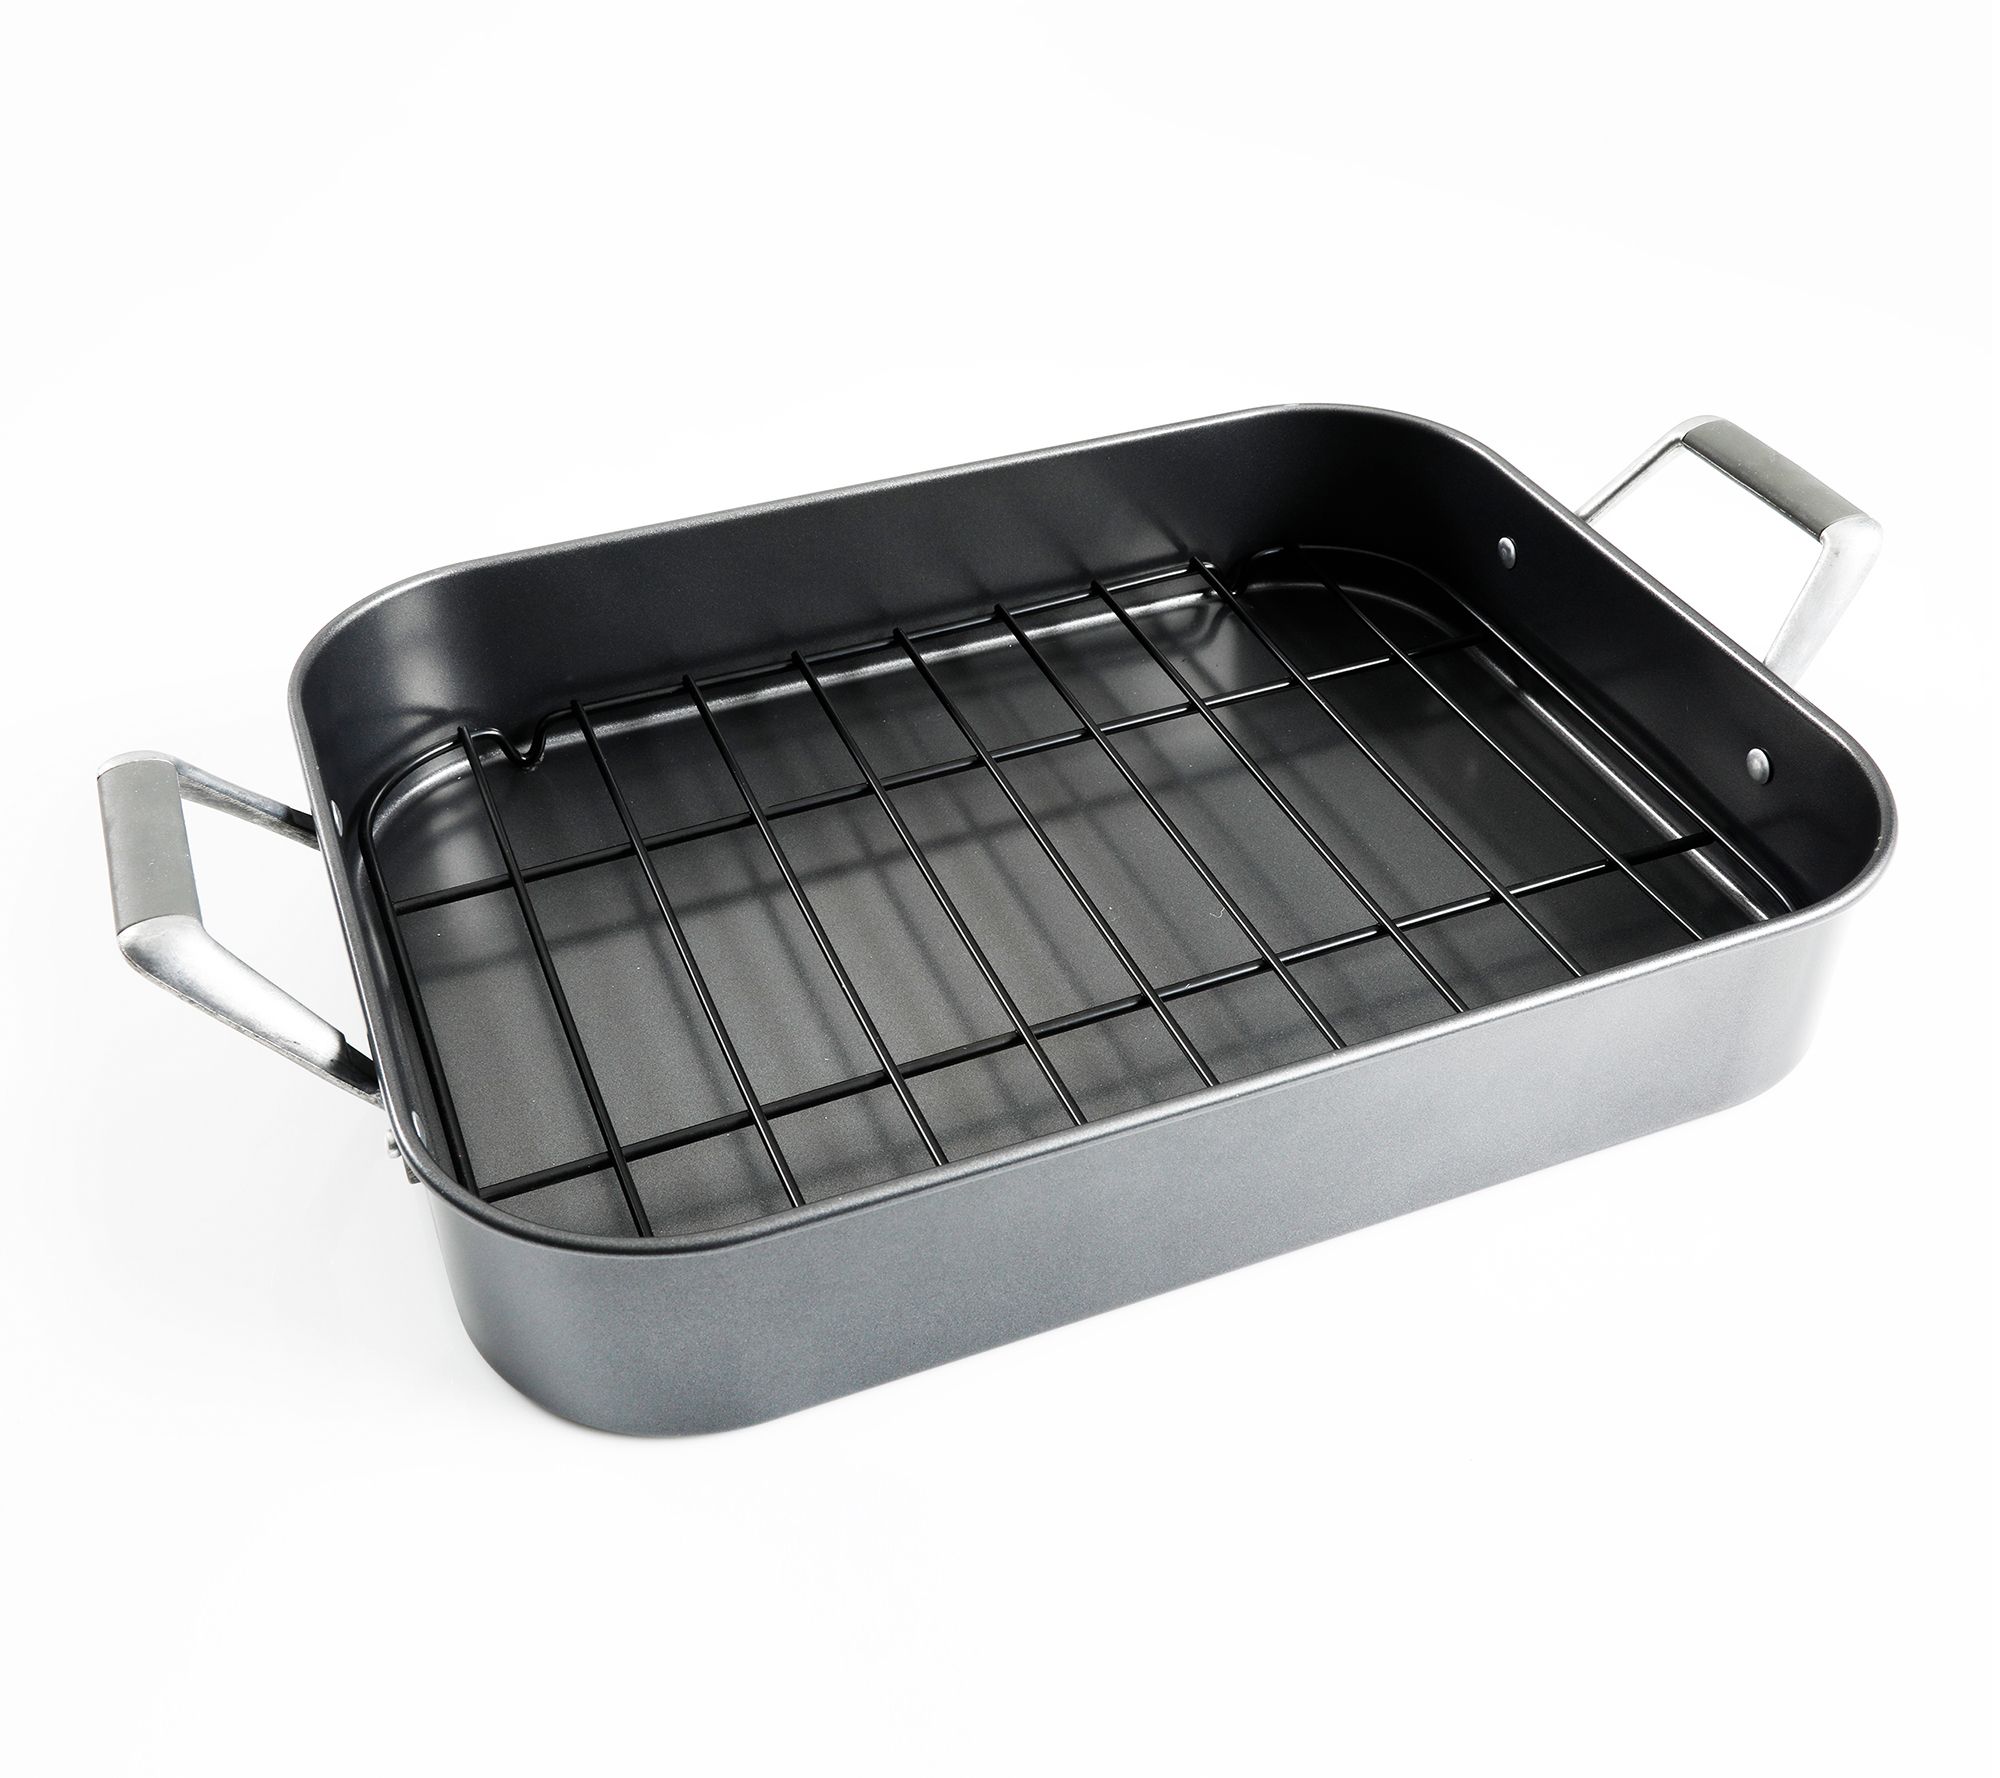 Le Creuset 16.25x13.25 Large Roasting Pan with Nonstick Rac